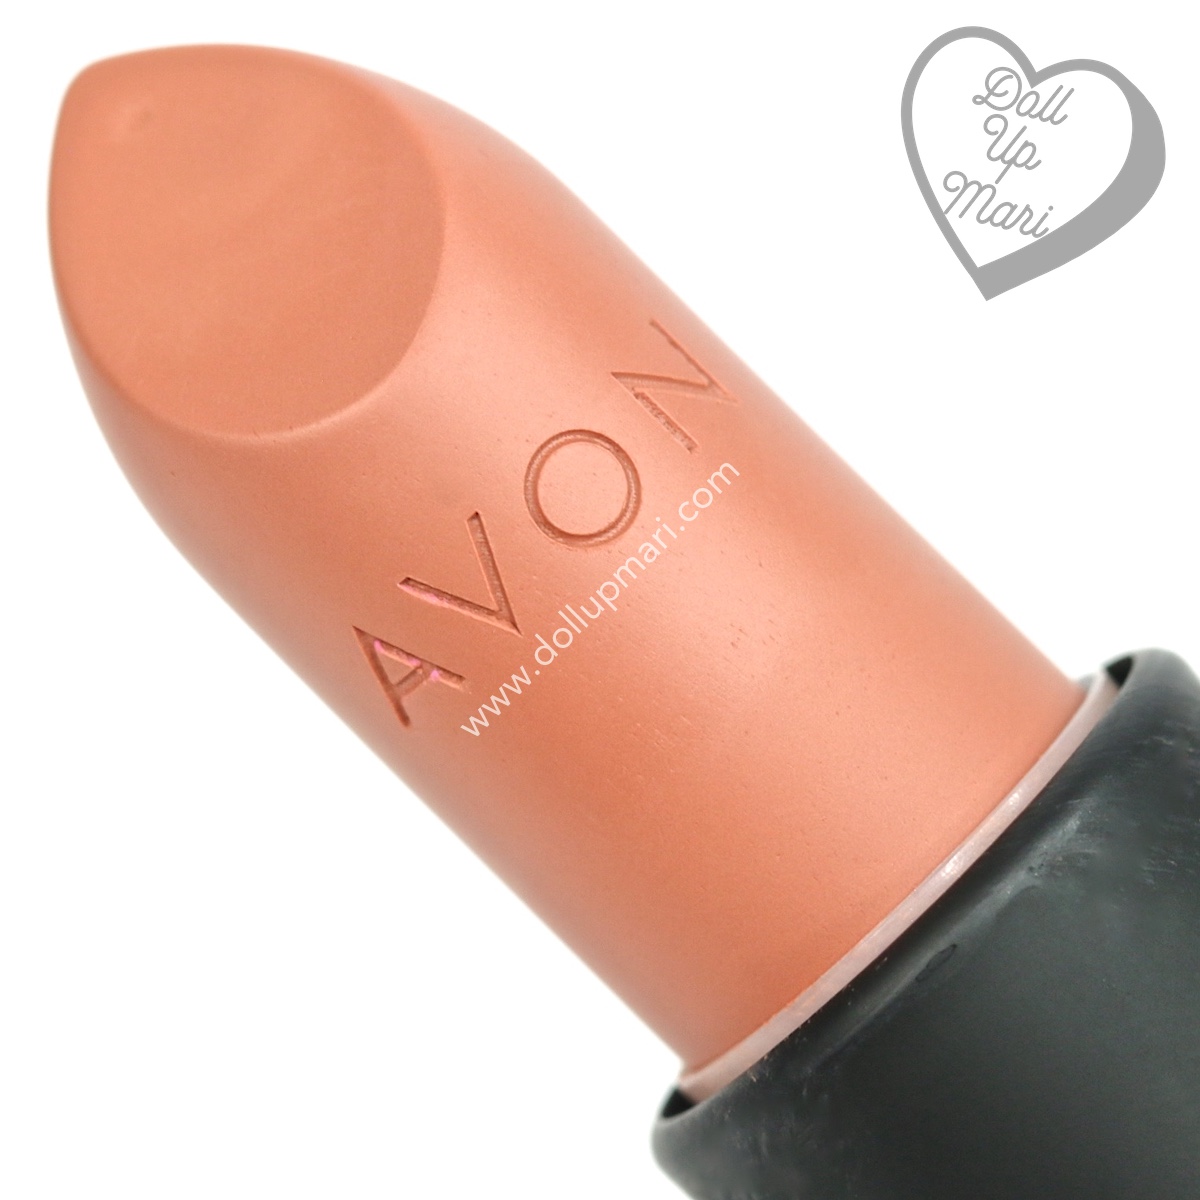 Zoom in of Au Naturale shade of AVON Perfectly Matte Lipstick 